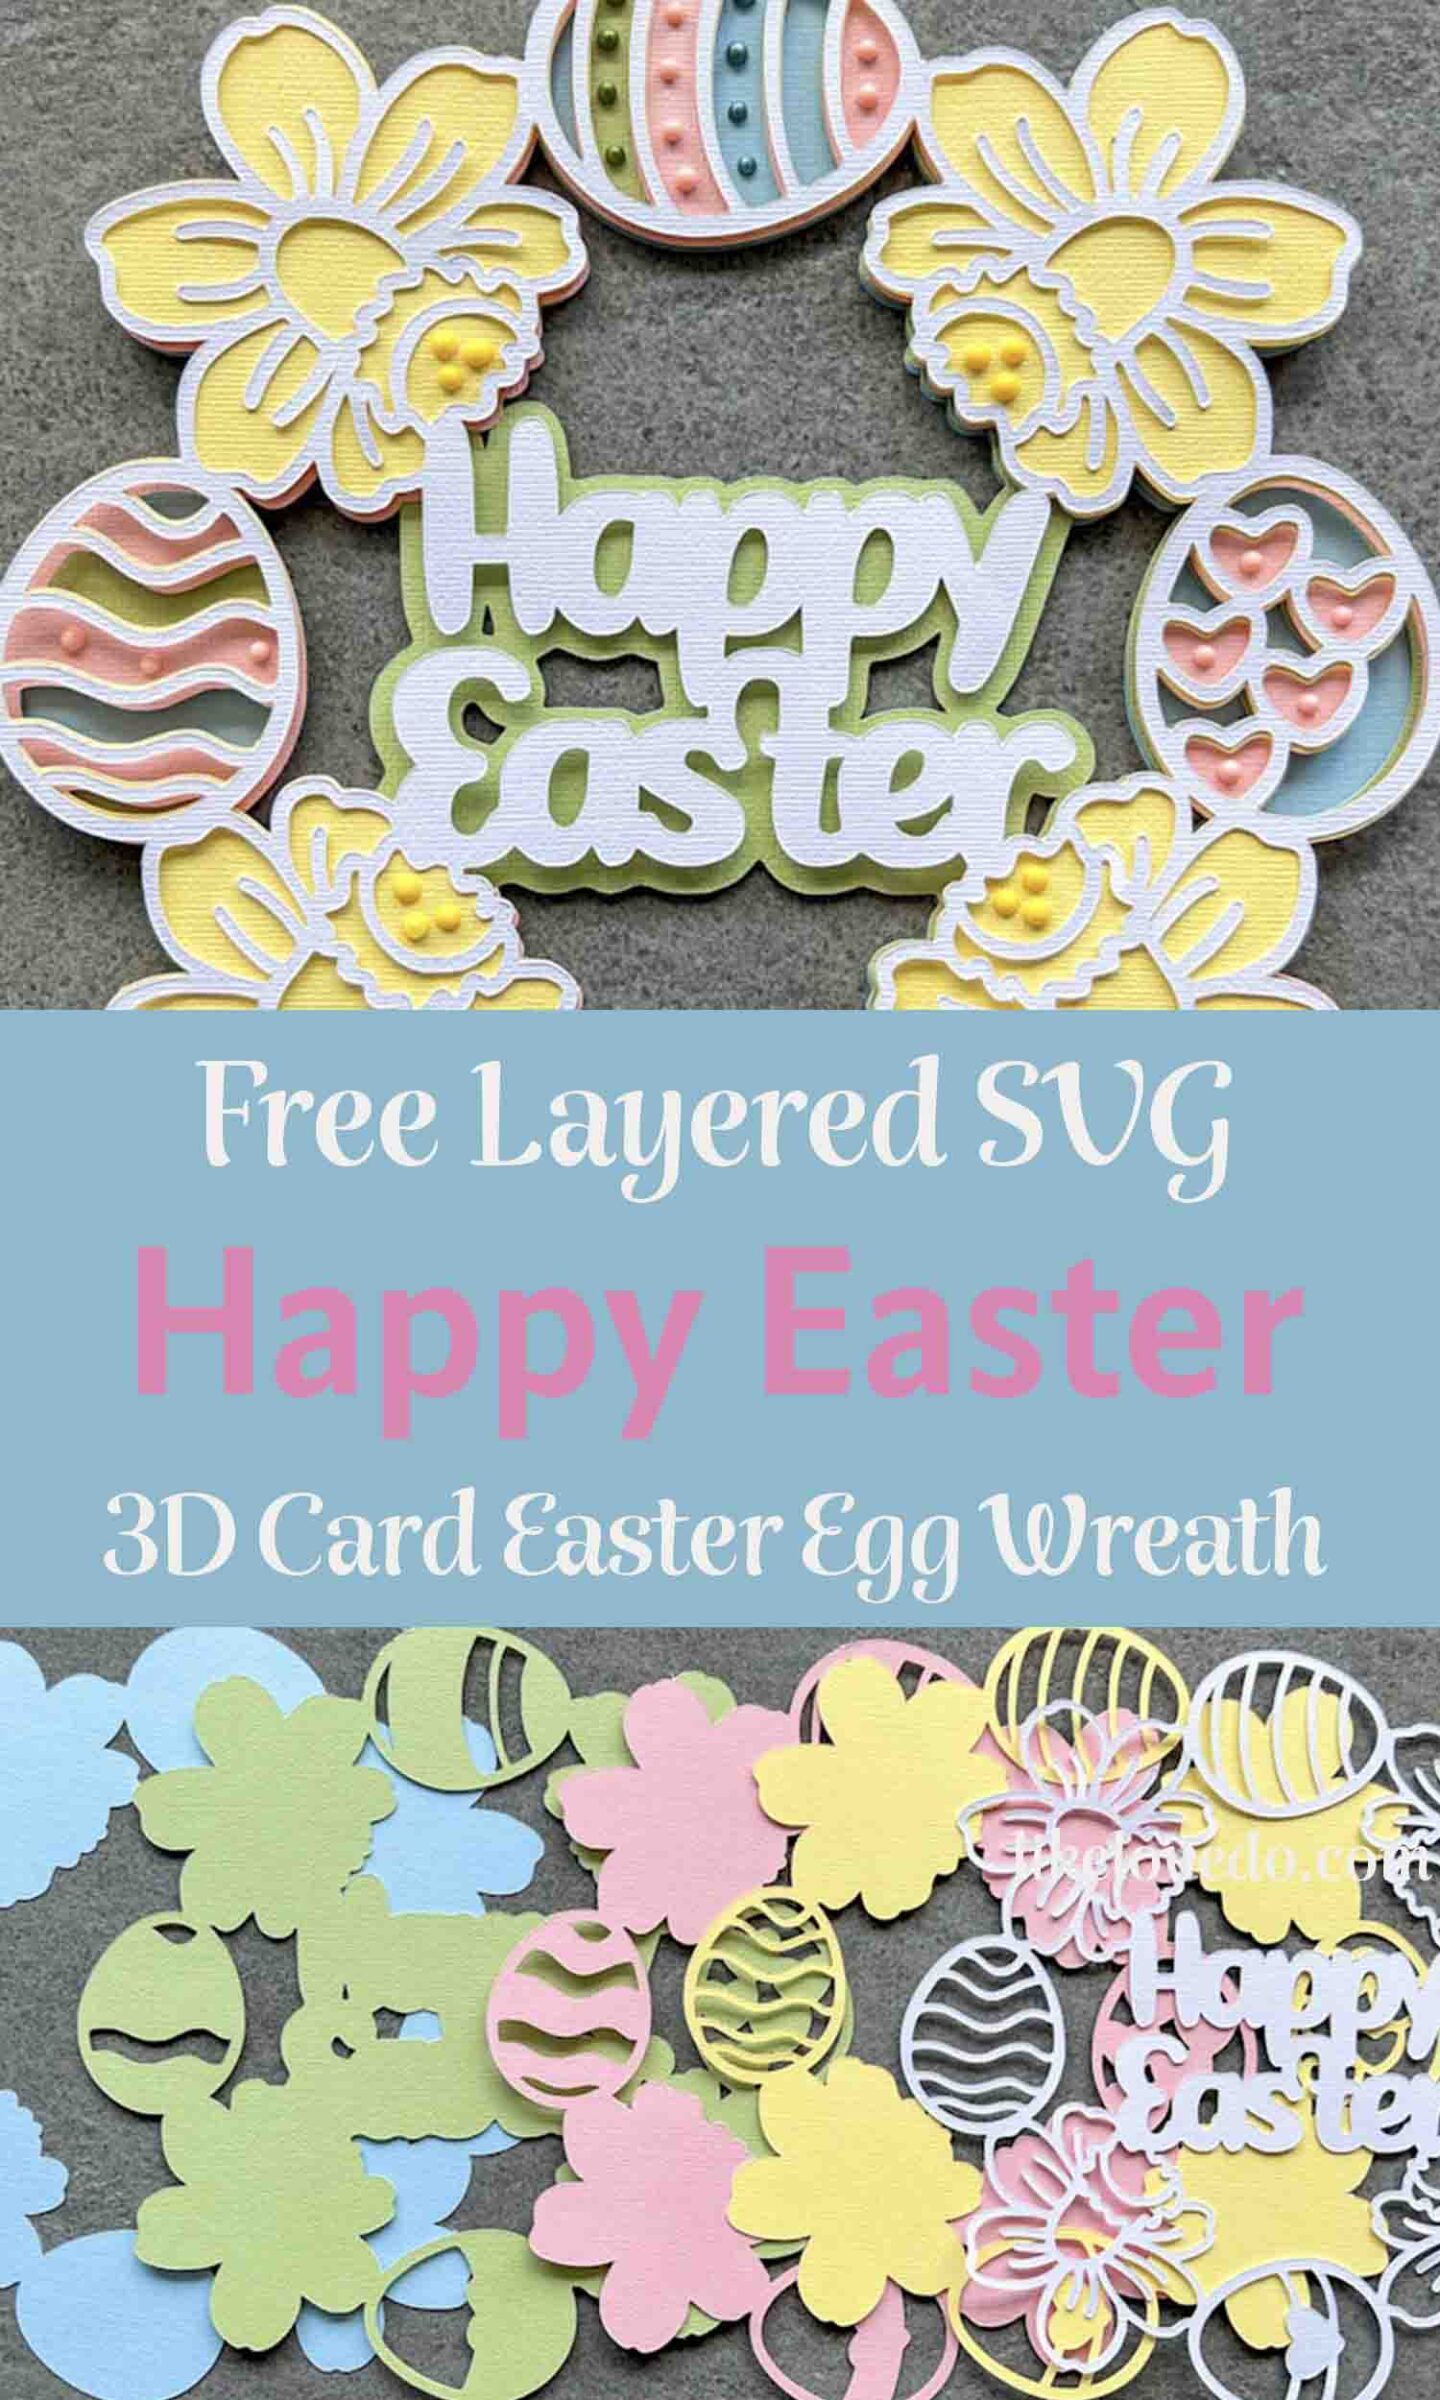 Layered Easter egg wreath SVG or Easter crafting and Easter home decorating pin image